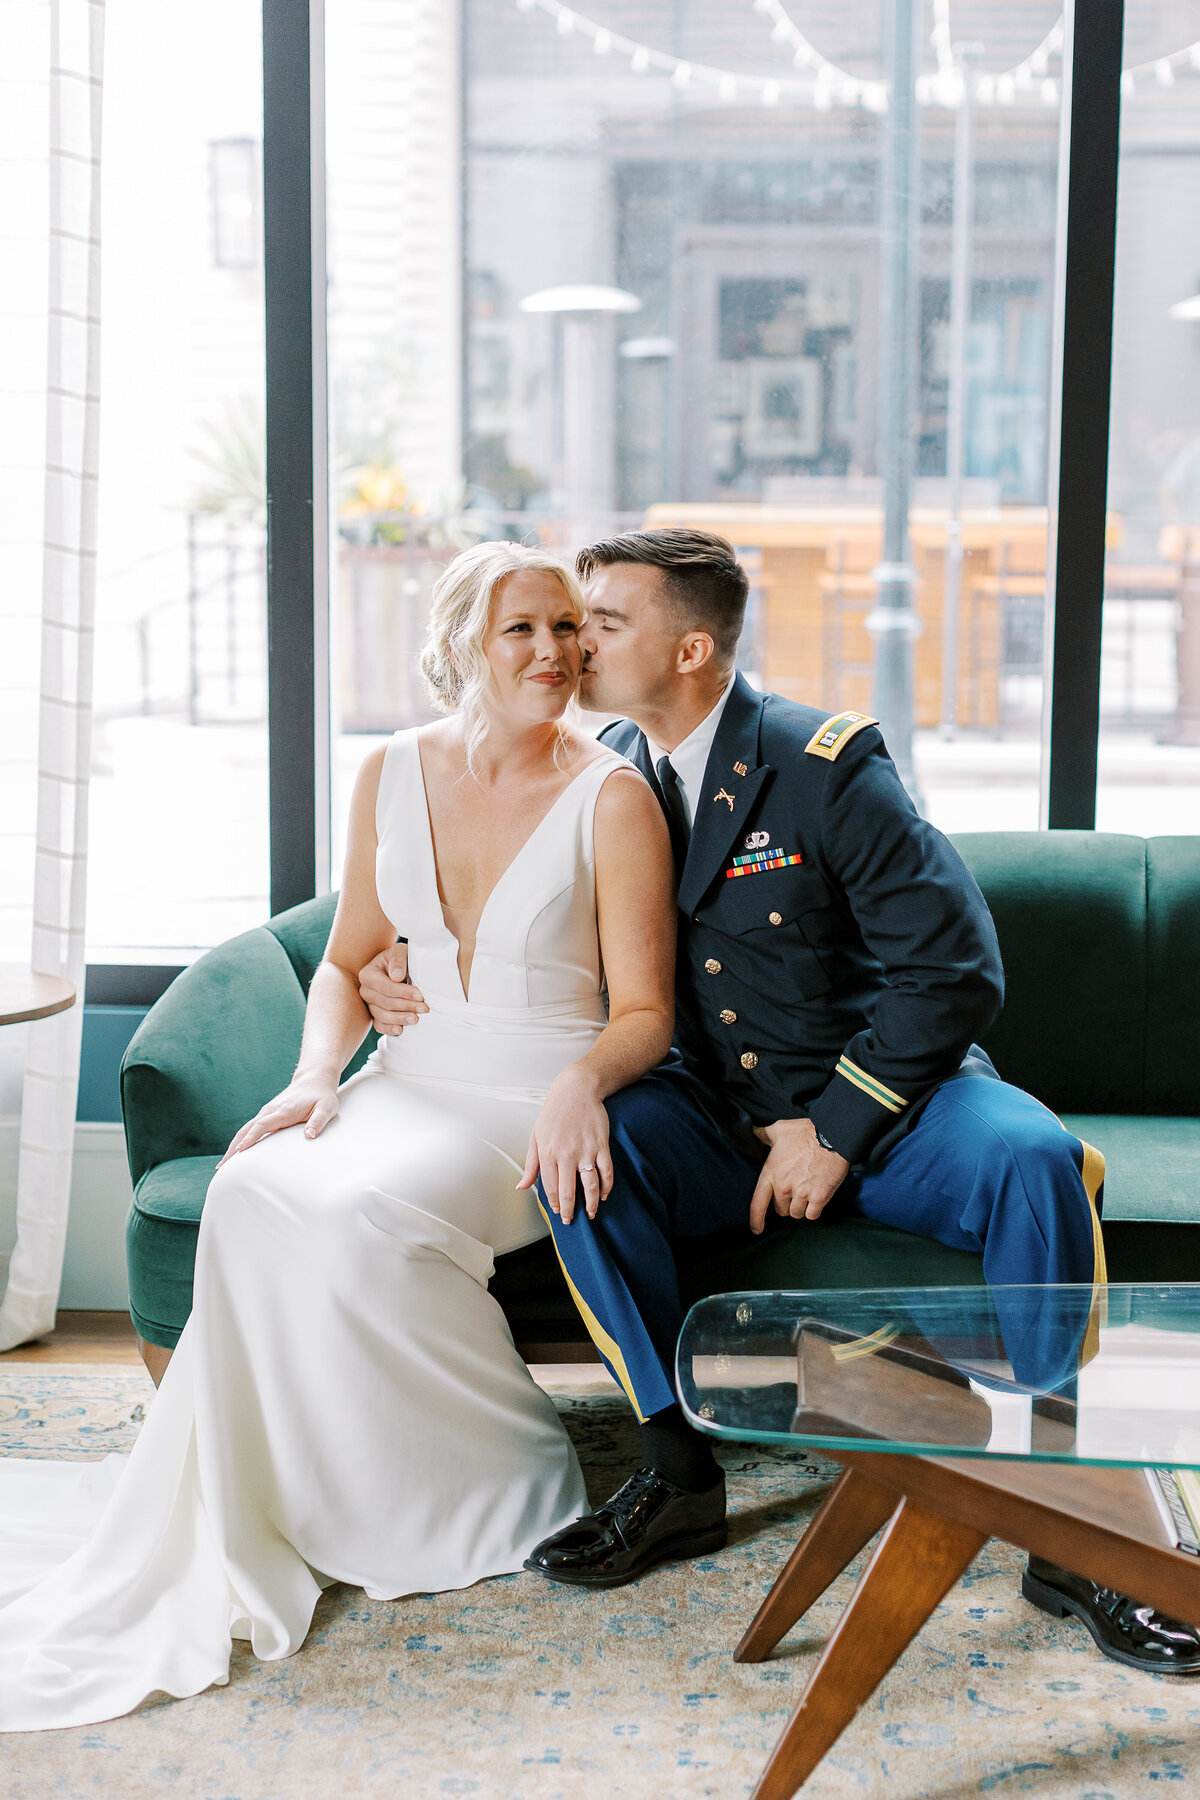 Military groom and bride kissing on a couch